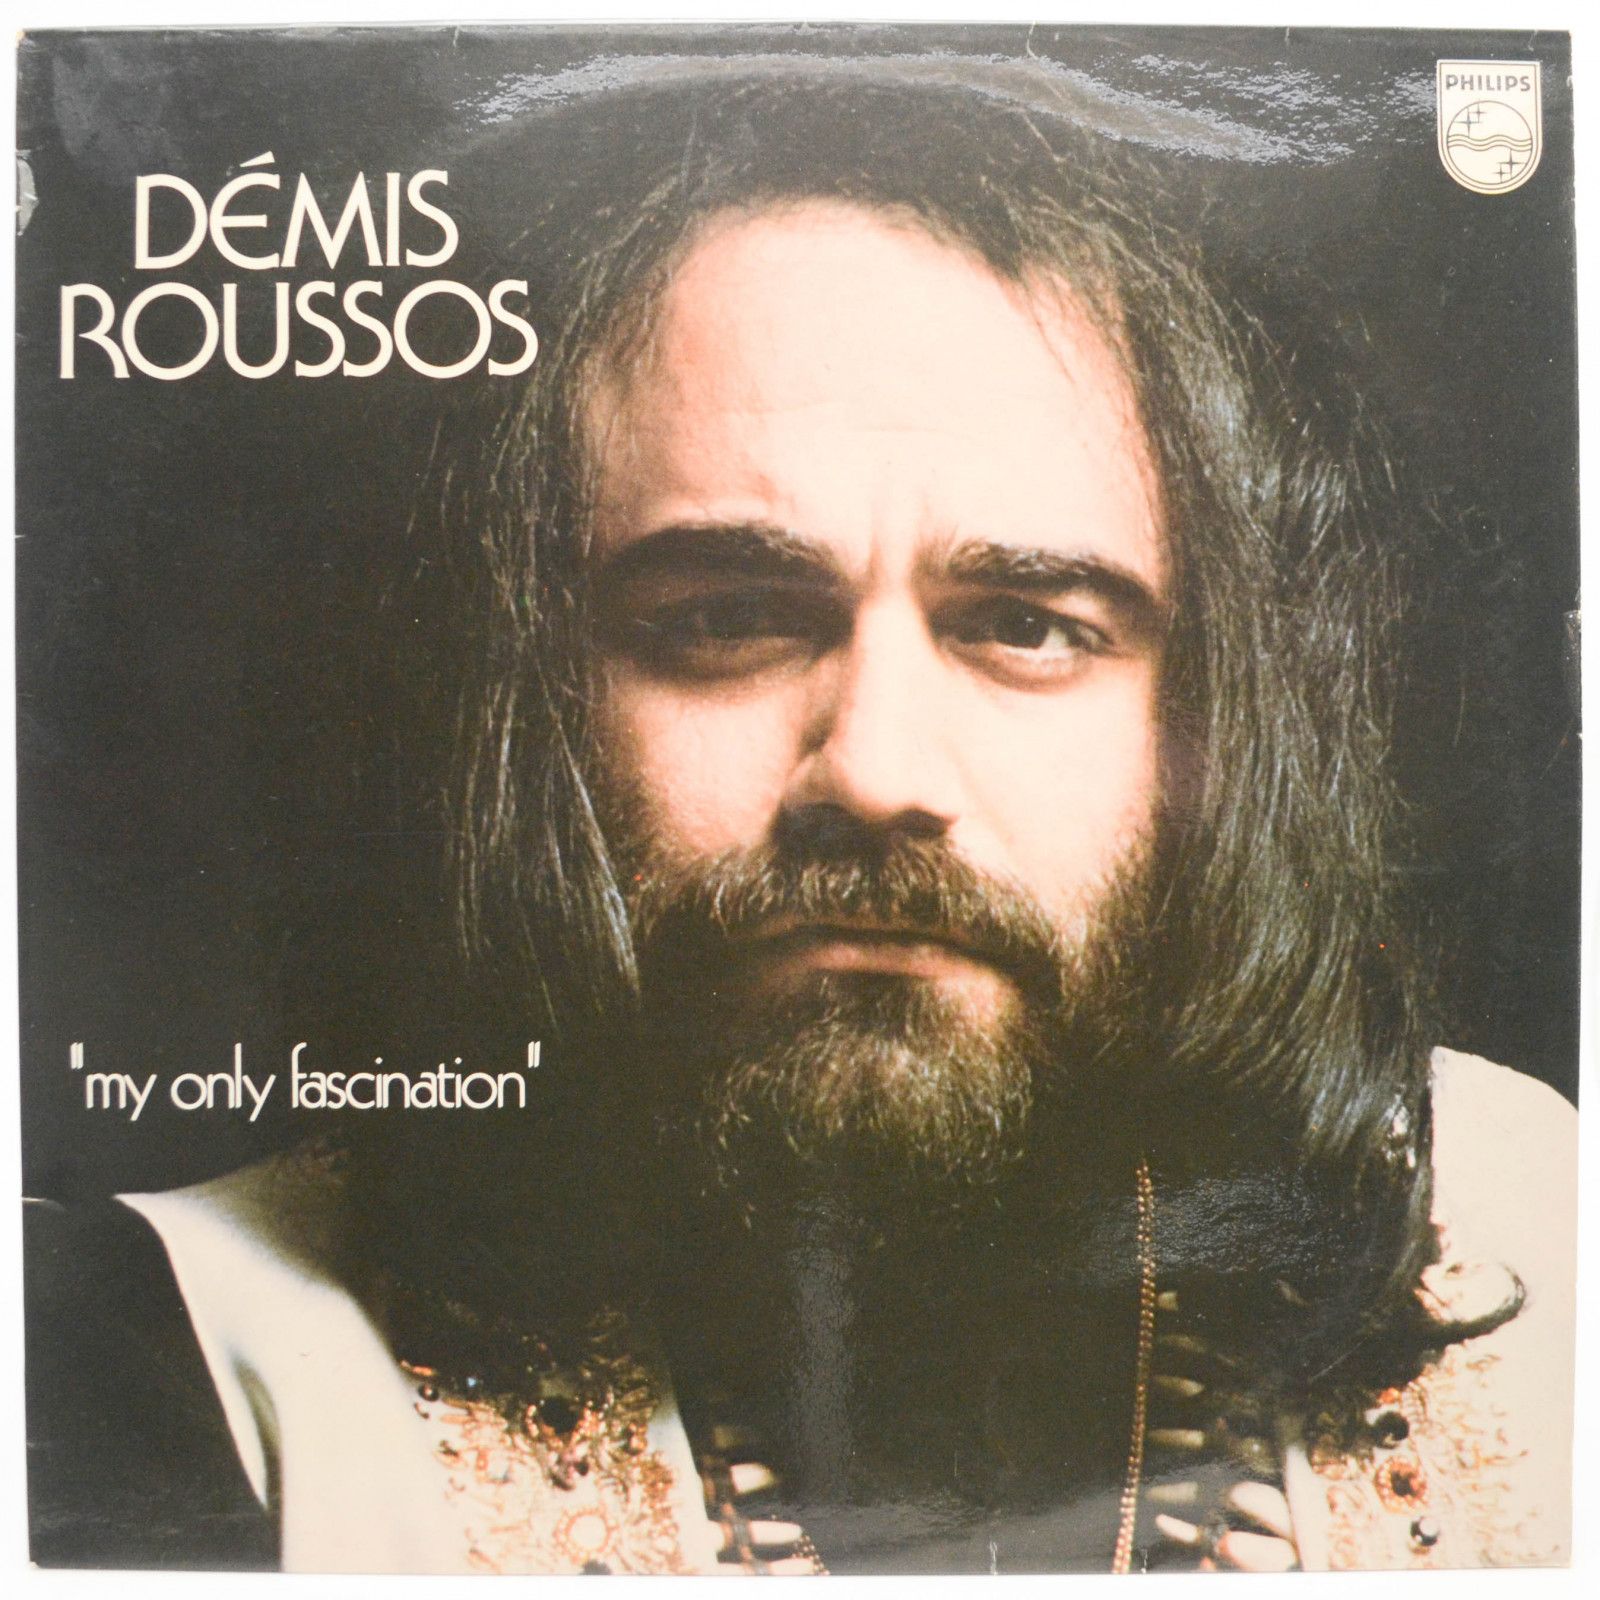 Démis Roussos — My Only Fascination (France), 1974